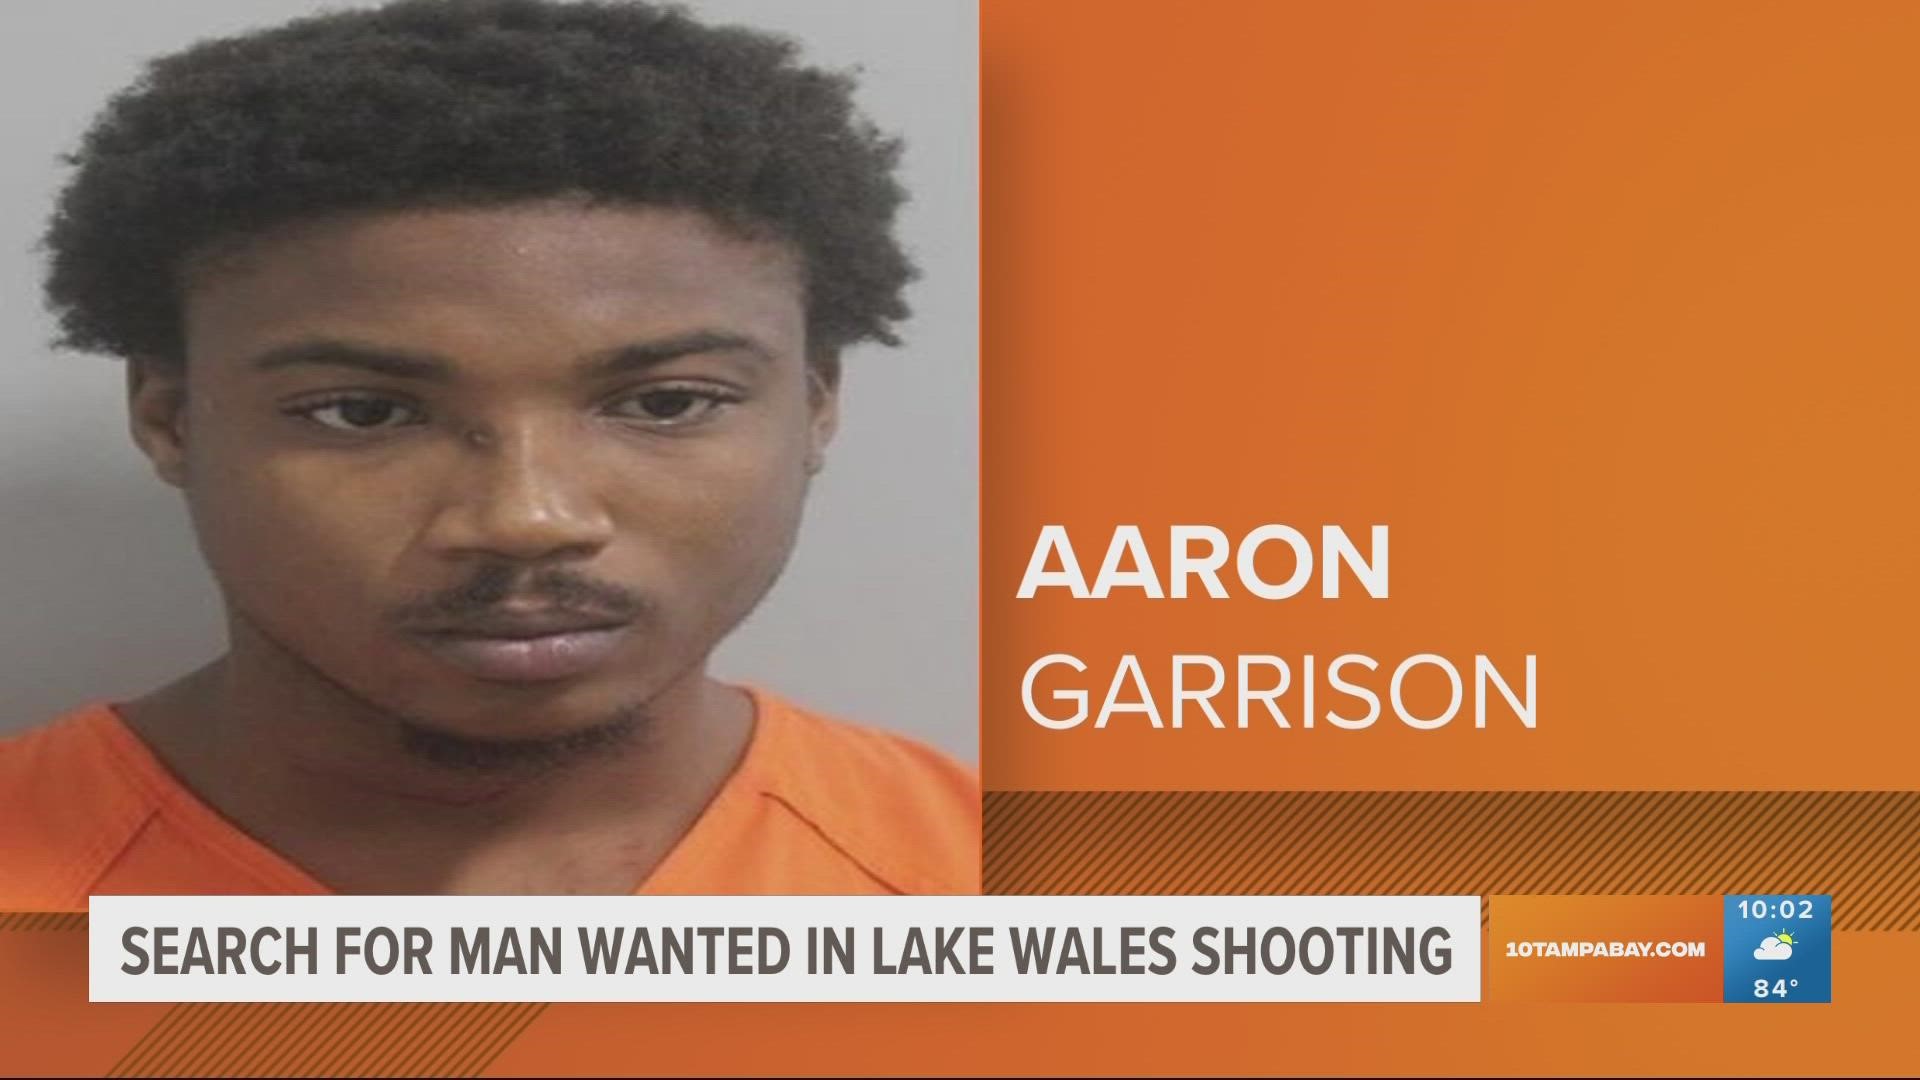 While investigating, police say they were able to identify 27-year-old Aaron Garrison of Bartow as the accused shooter.